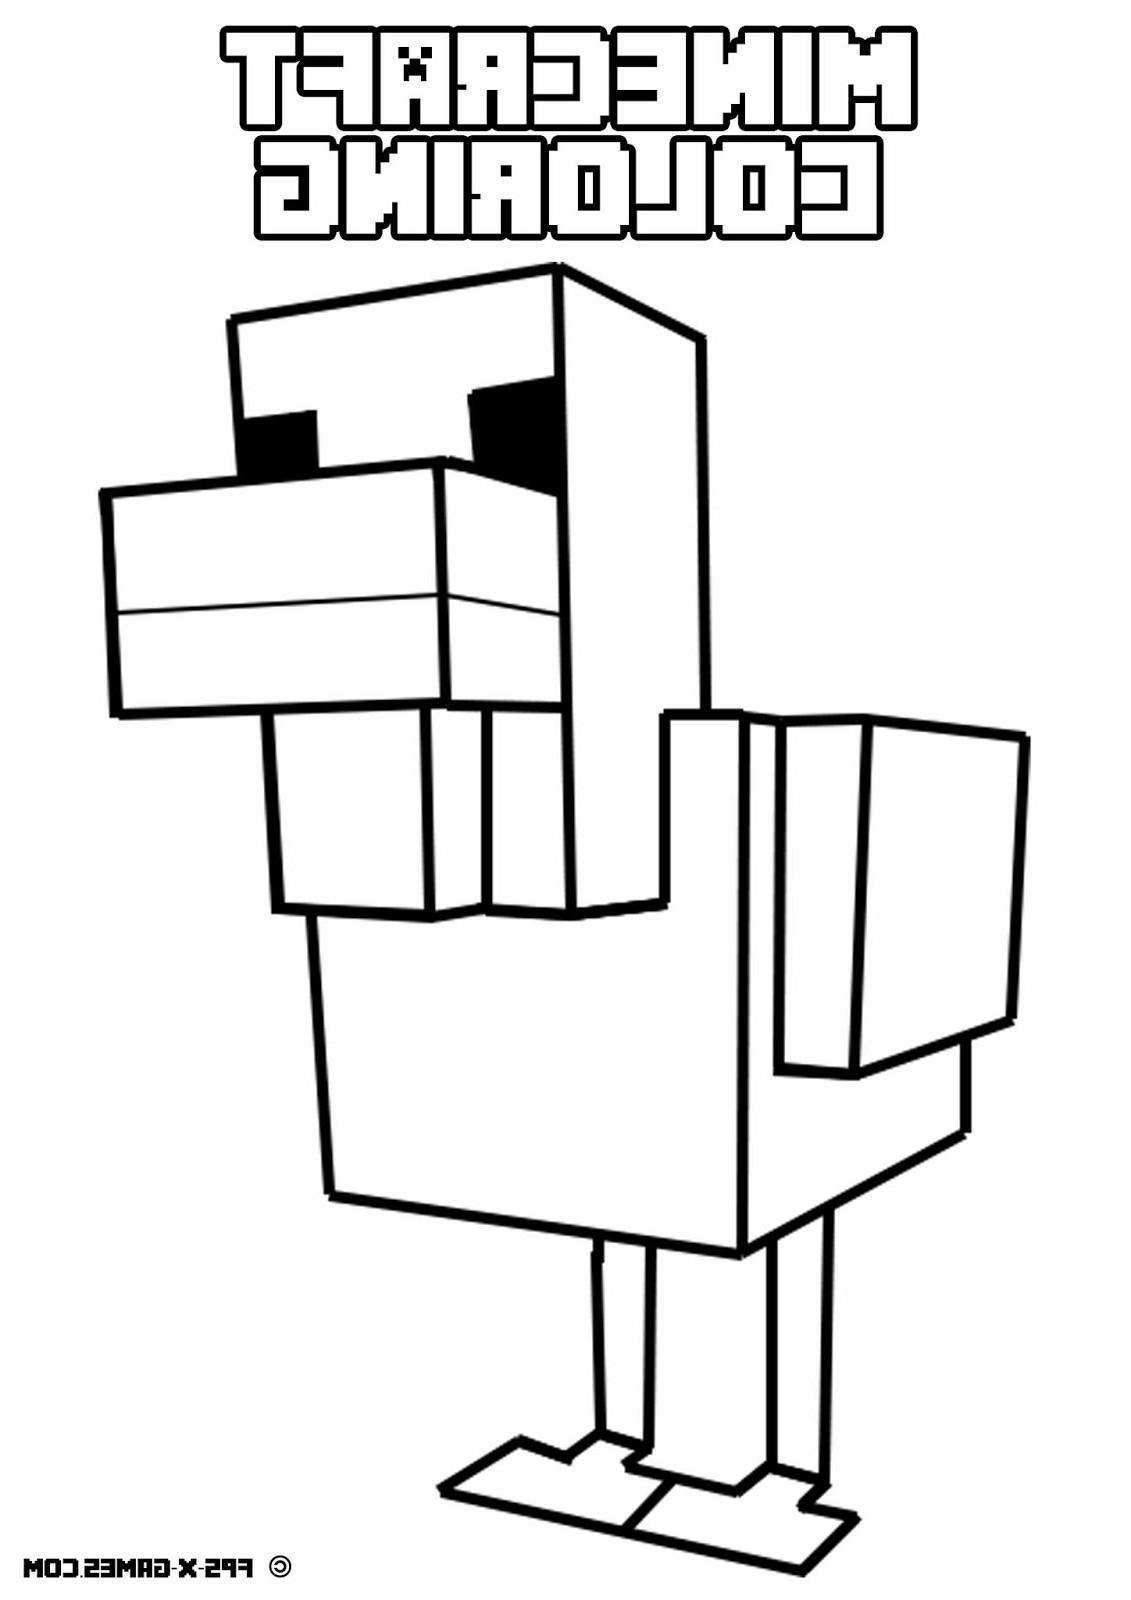 Herobrine Coloring Pages Coloring Pages Of Minecraft Herobrine